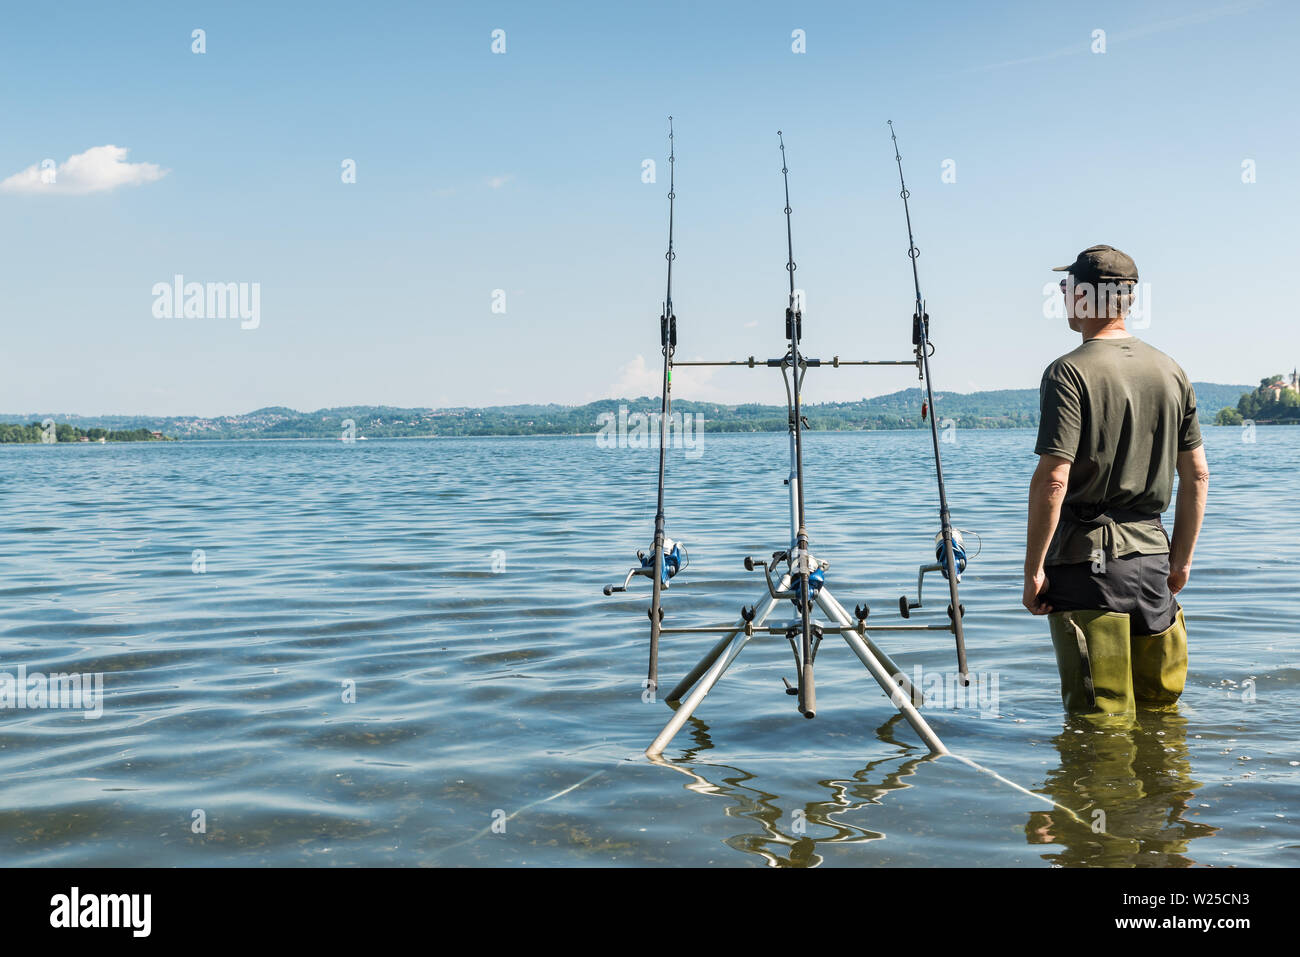 https://c8.alamy.com/comp/W25CN3/fishing-adventures-carp-fishing-fisherman-with-green-rubber-boots-and-camouflage-clothing-standing-near-the-fishing-gear-copy-space-to-the-left-W25CN3.jpg